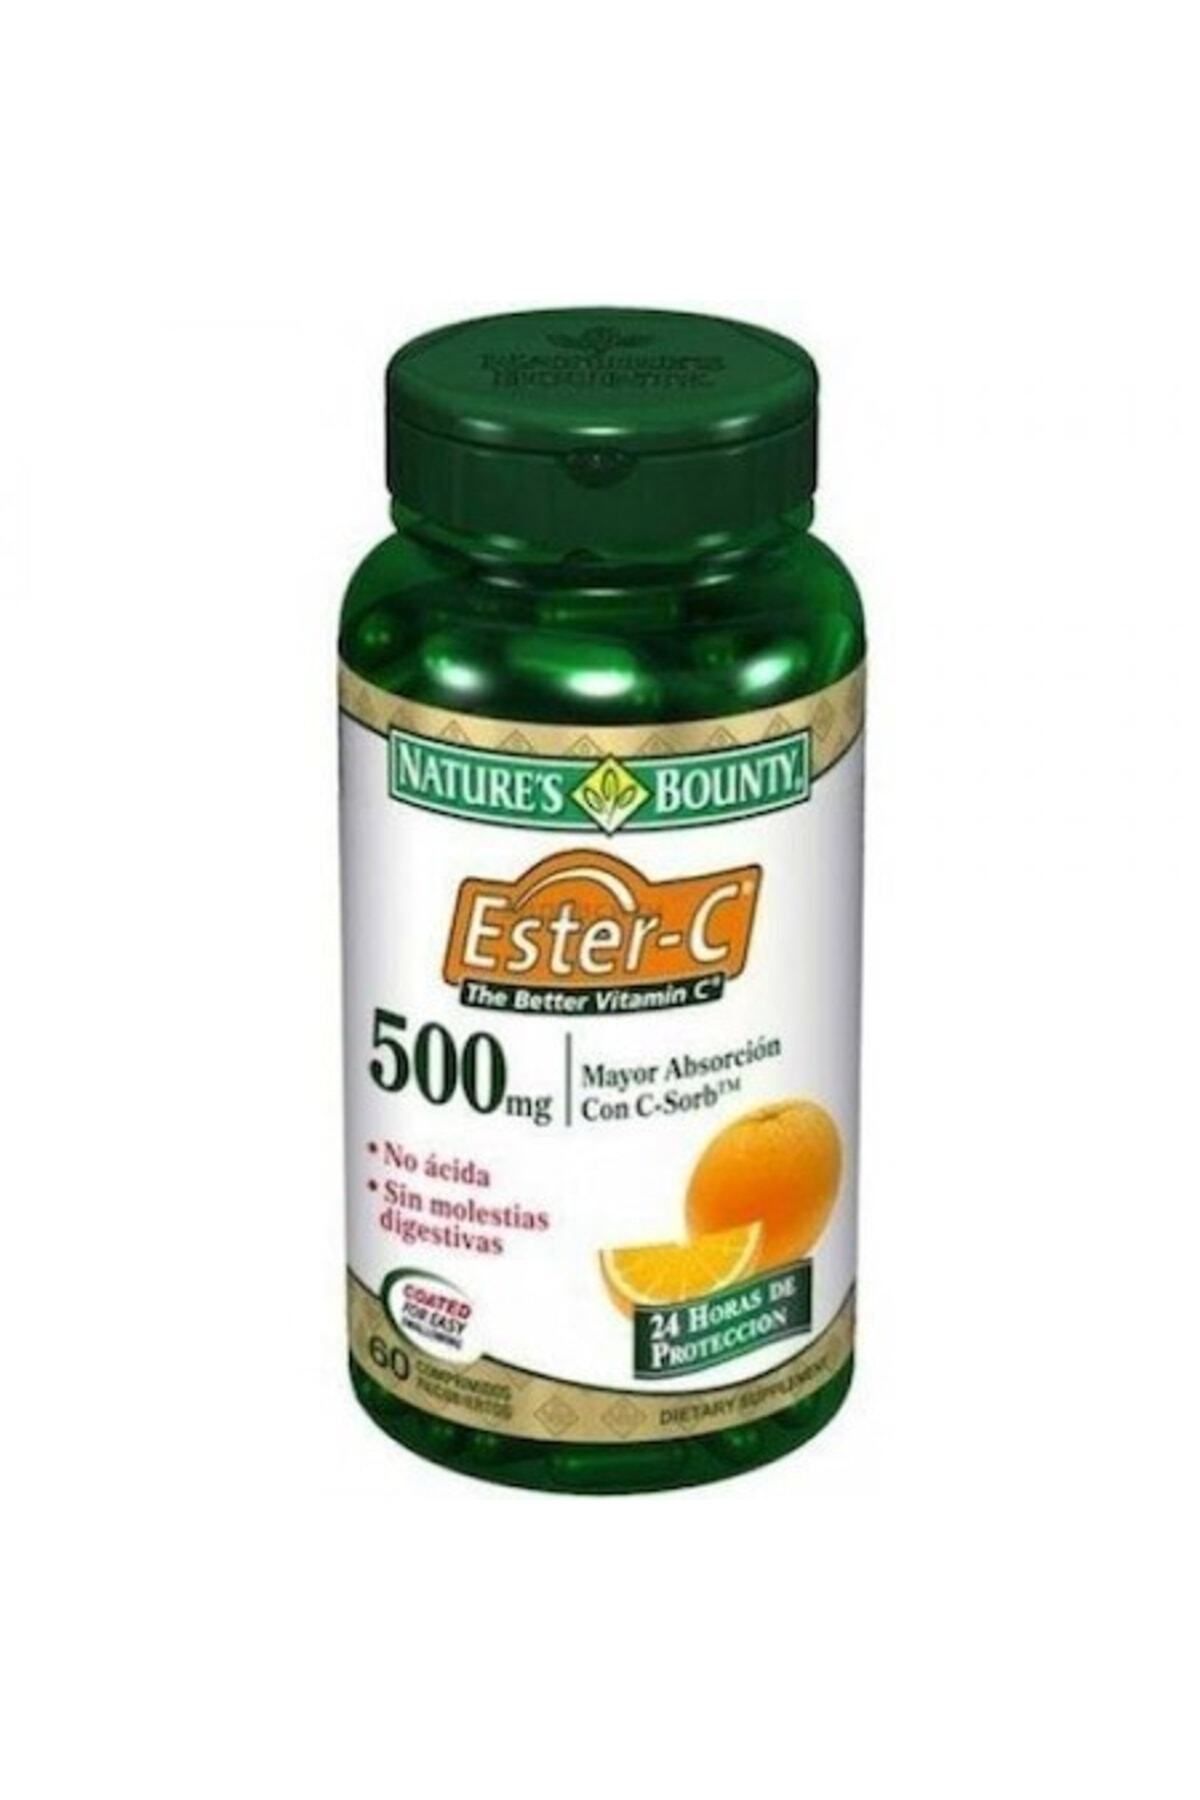 Natures Bounty Ester C 500 Mg 60 Tablet